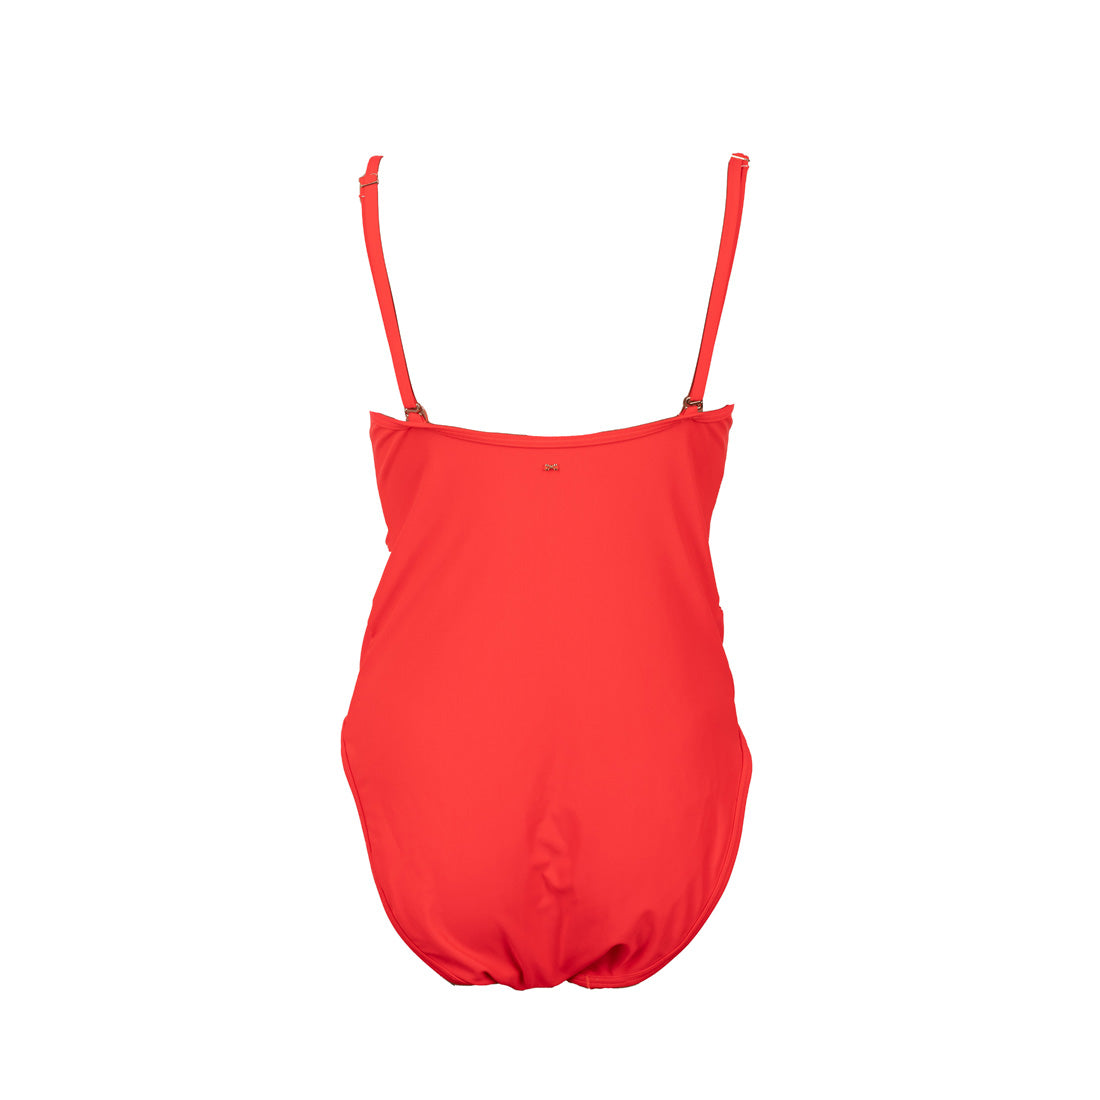 Ted Baker Brand New Red Swimsuit